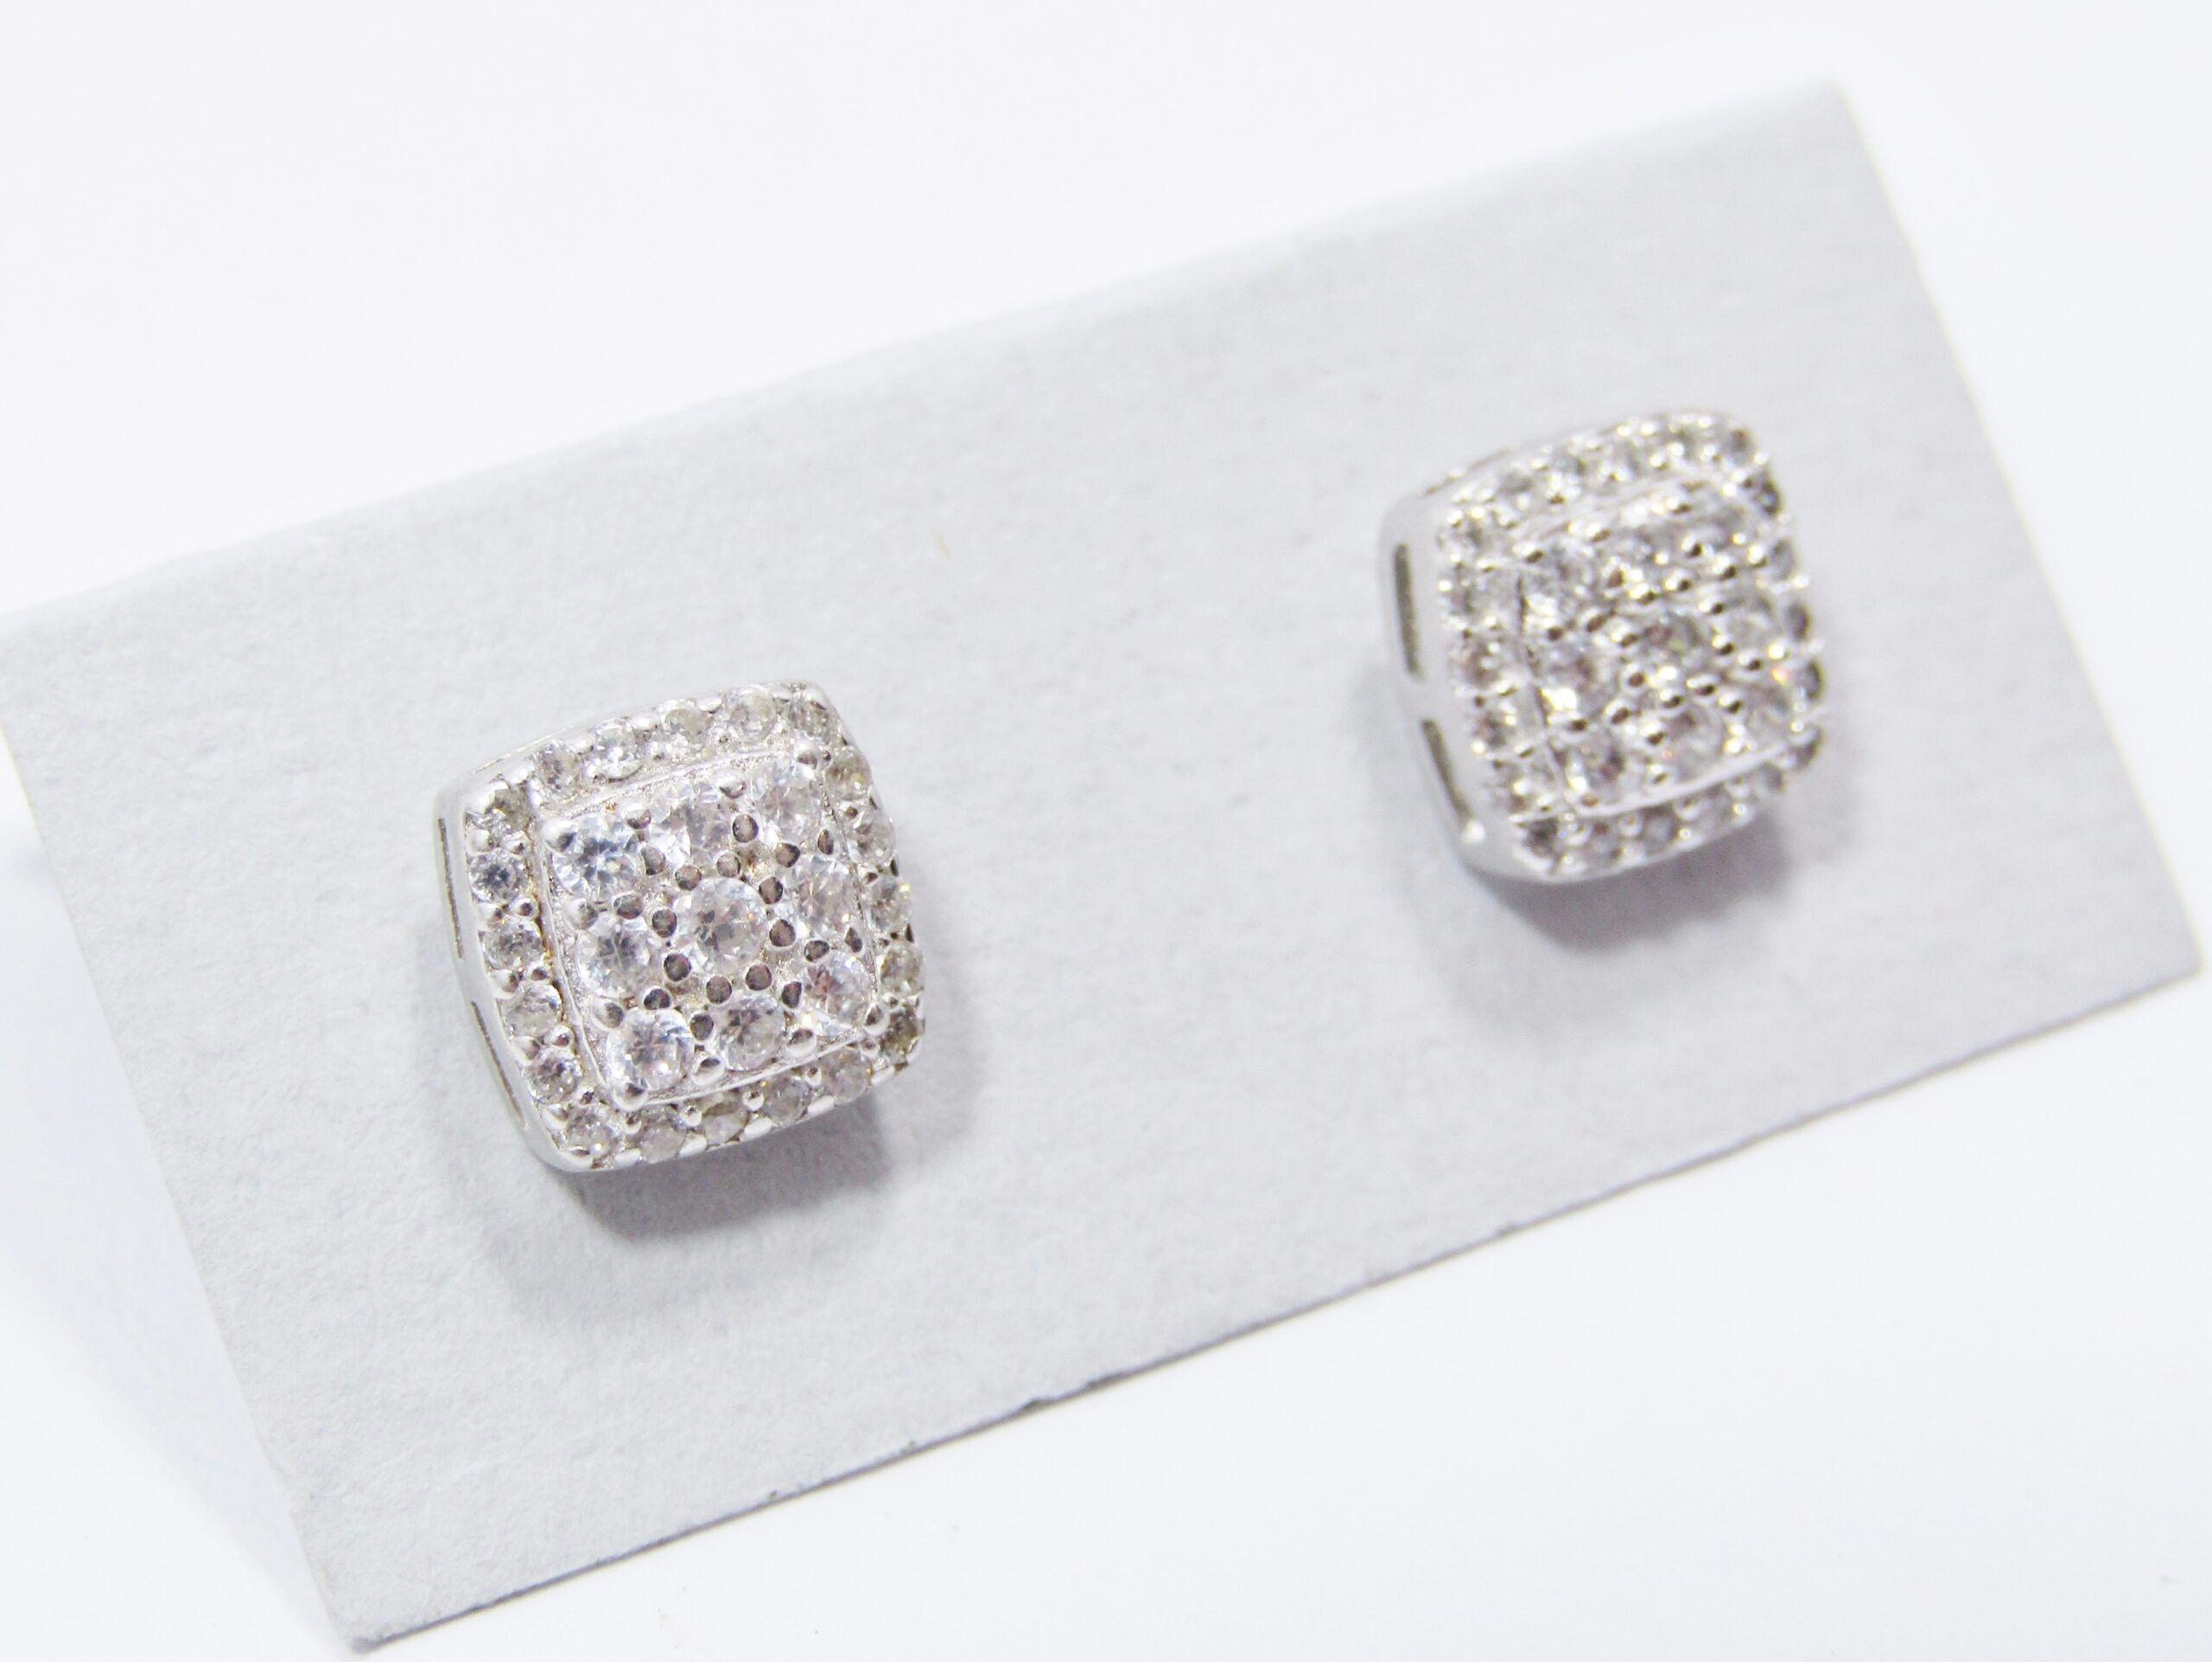 A Lovely Pair of Square Zirconia Earrings in Sterling Silver